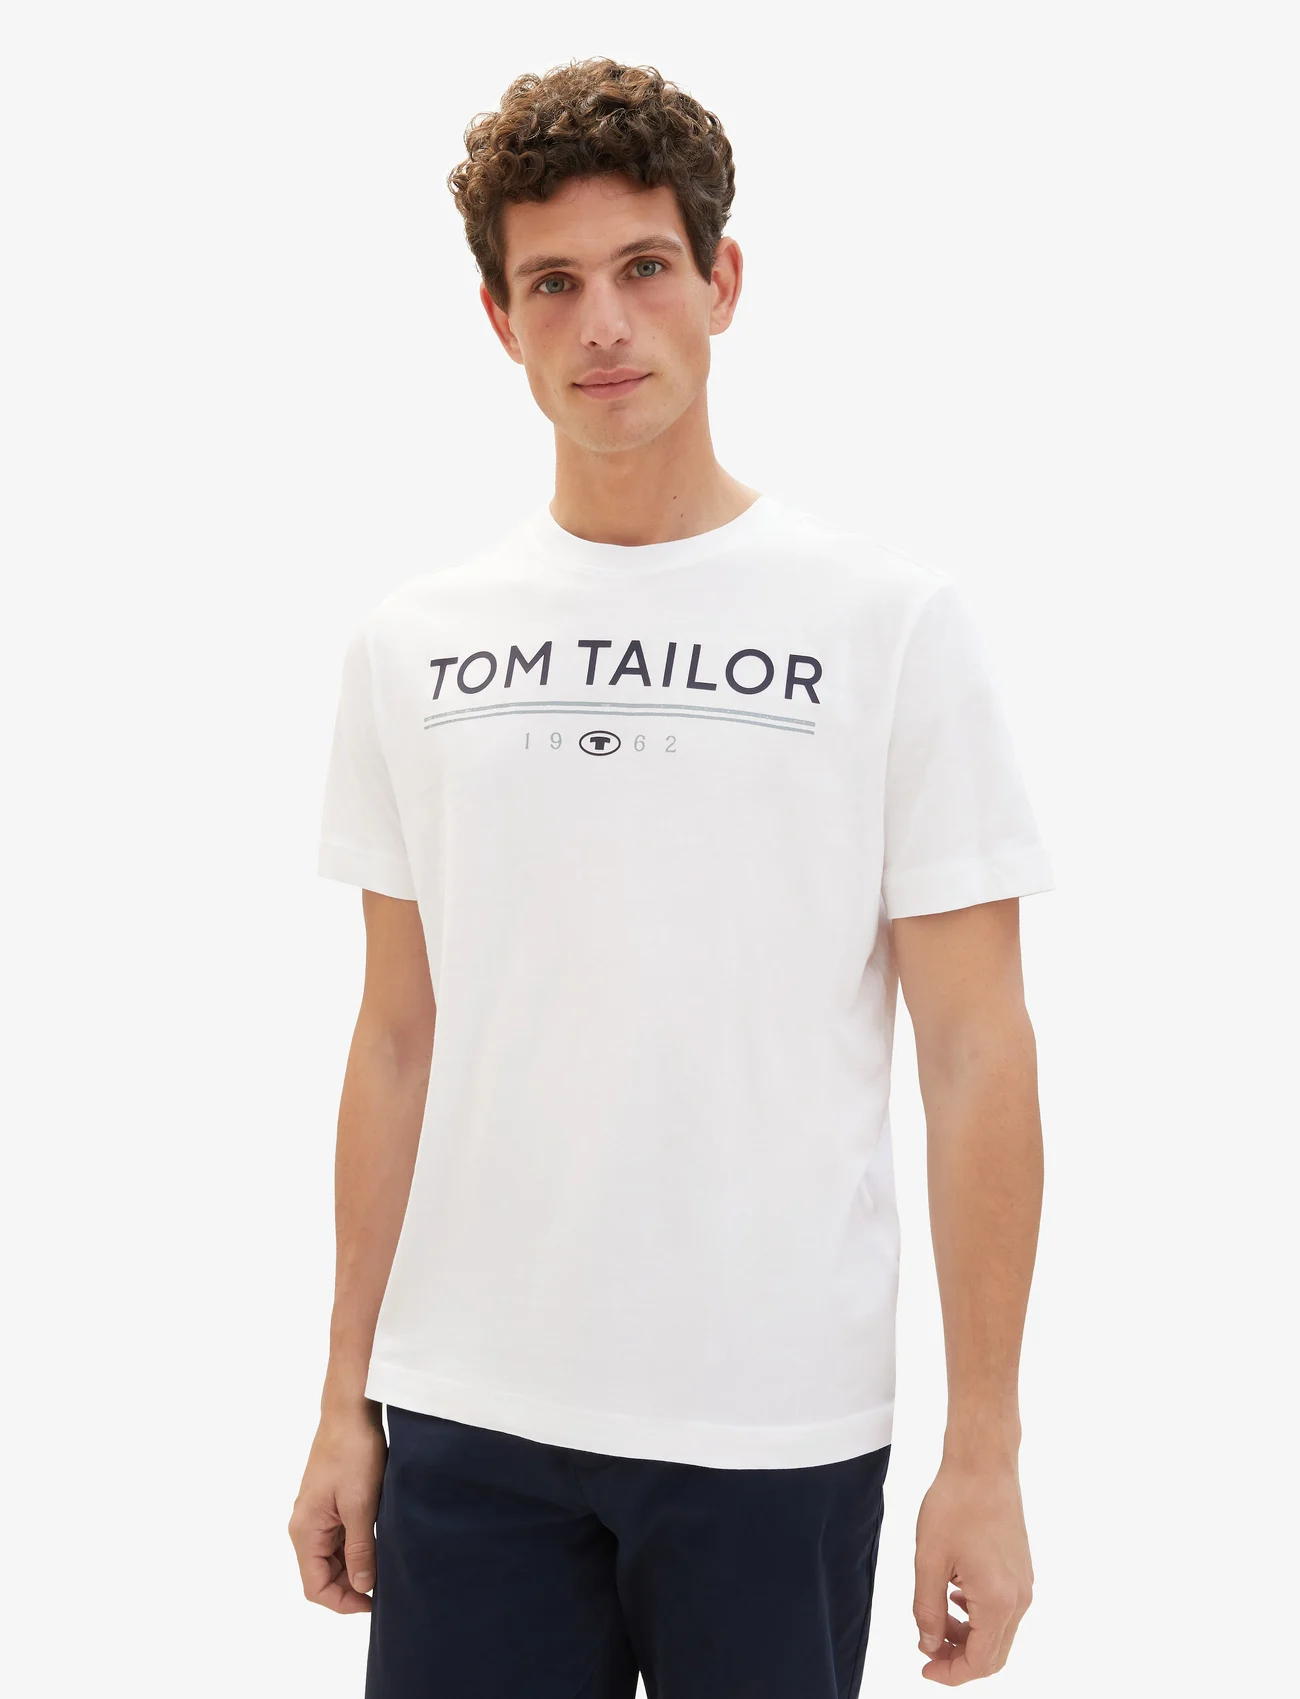 Tom Tailor - printed t-shirt - short-sleeved t-shirts - white - 0